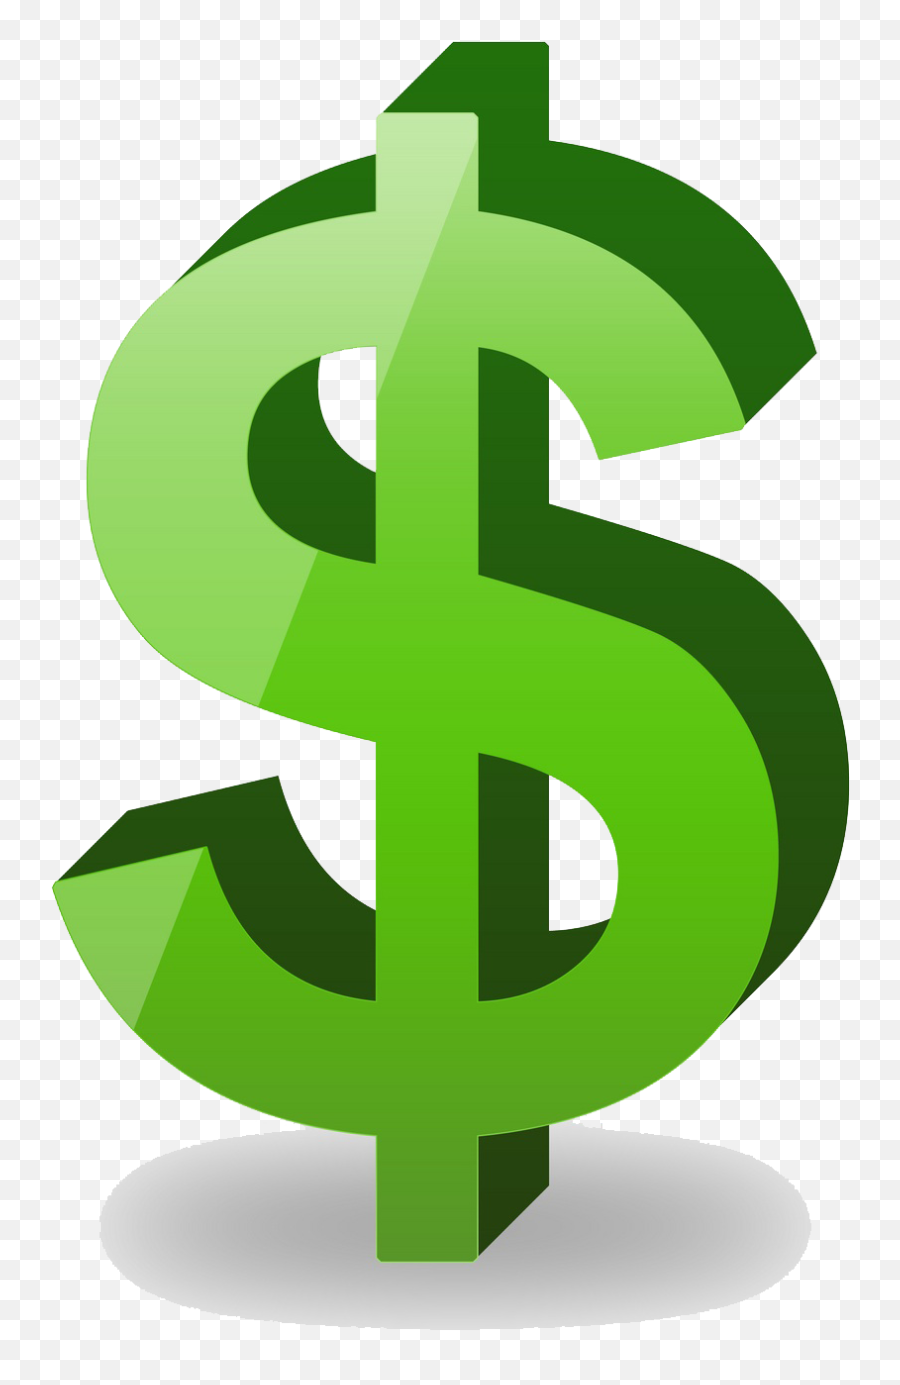 Dollar - Dollar Sign Clipart Png,Dollar Sign Icon Transparent Background